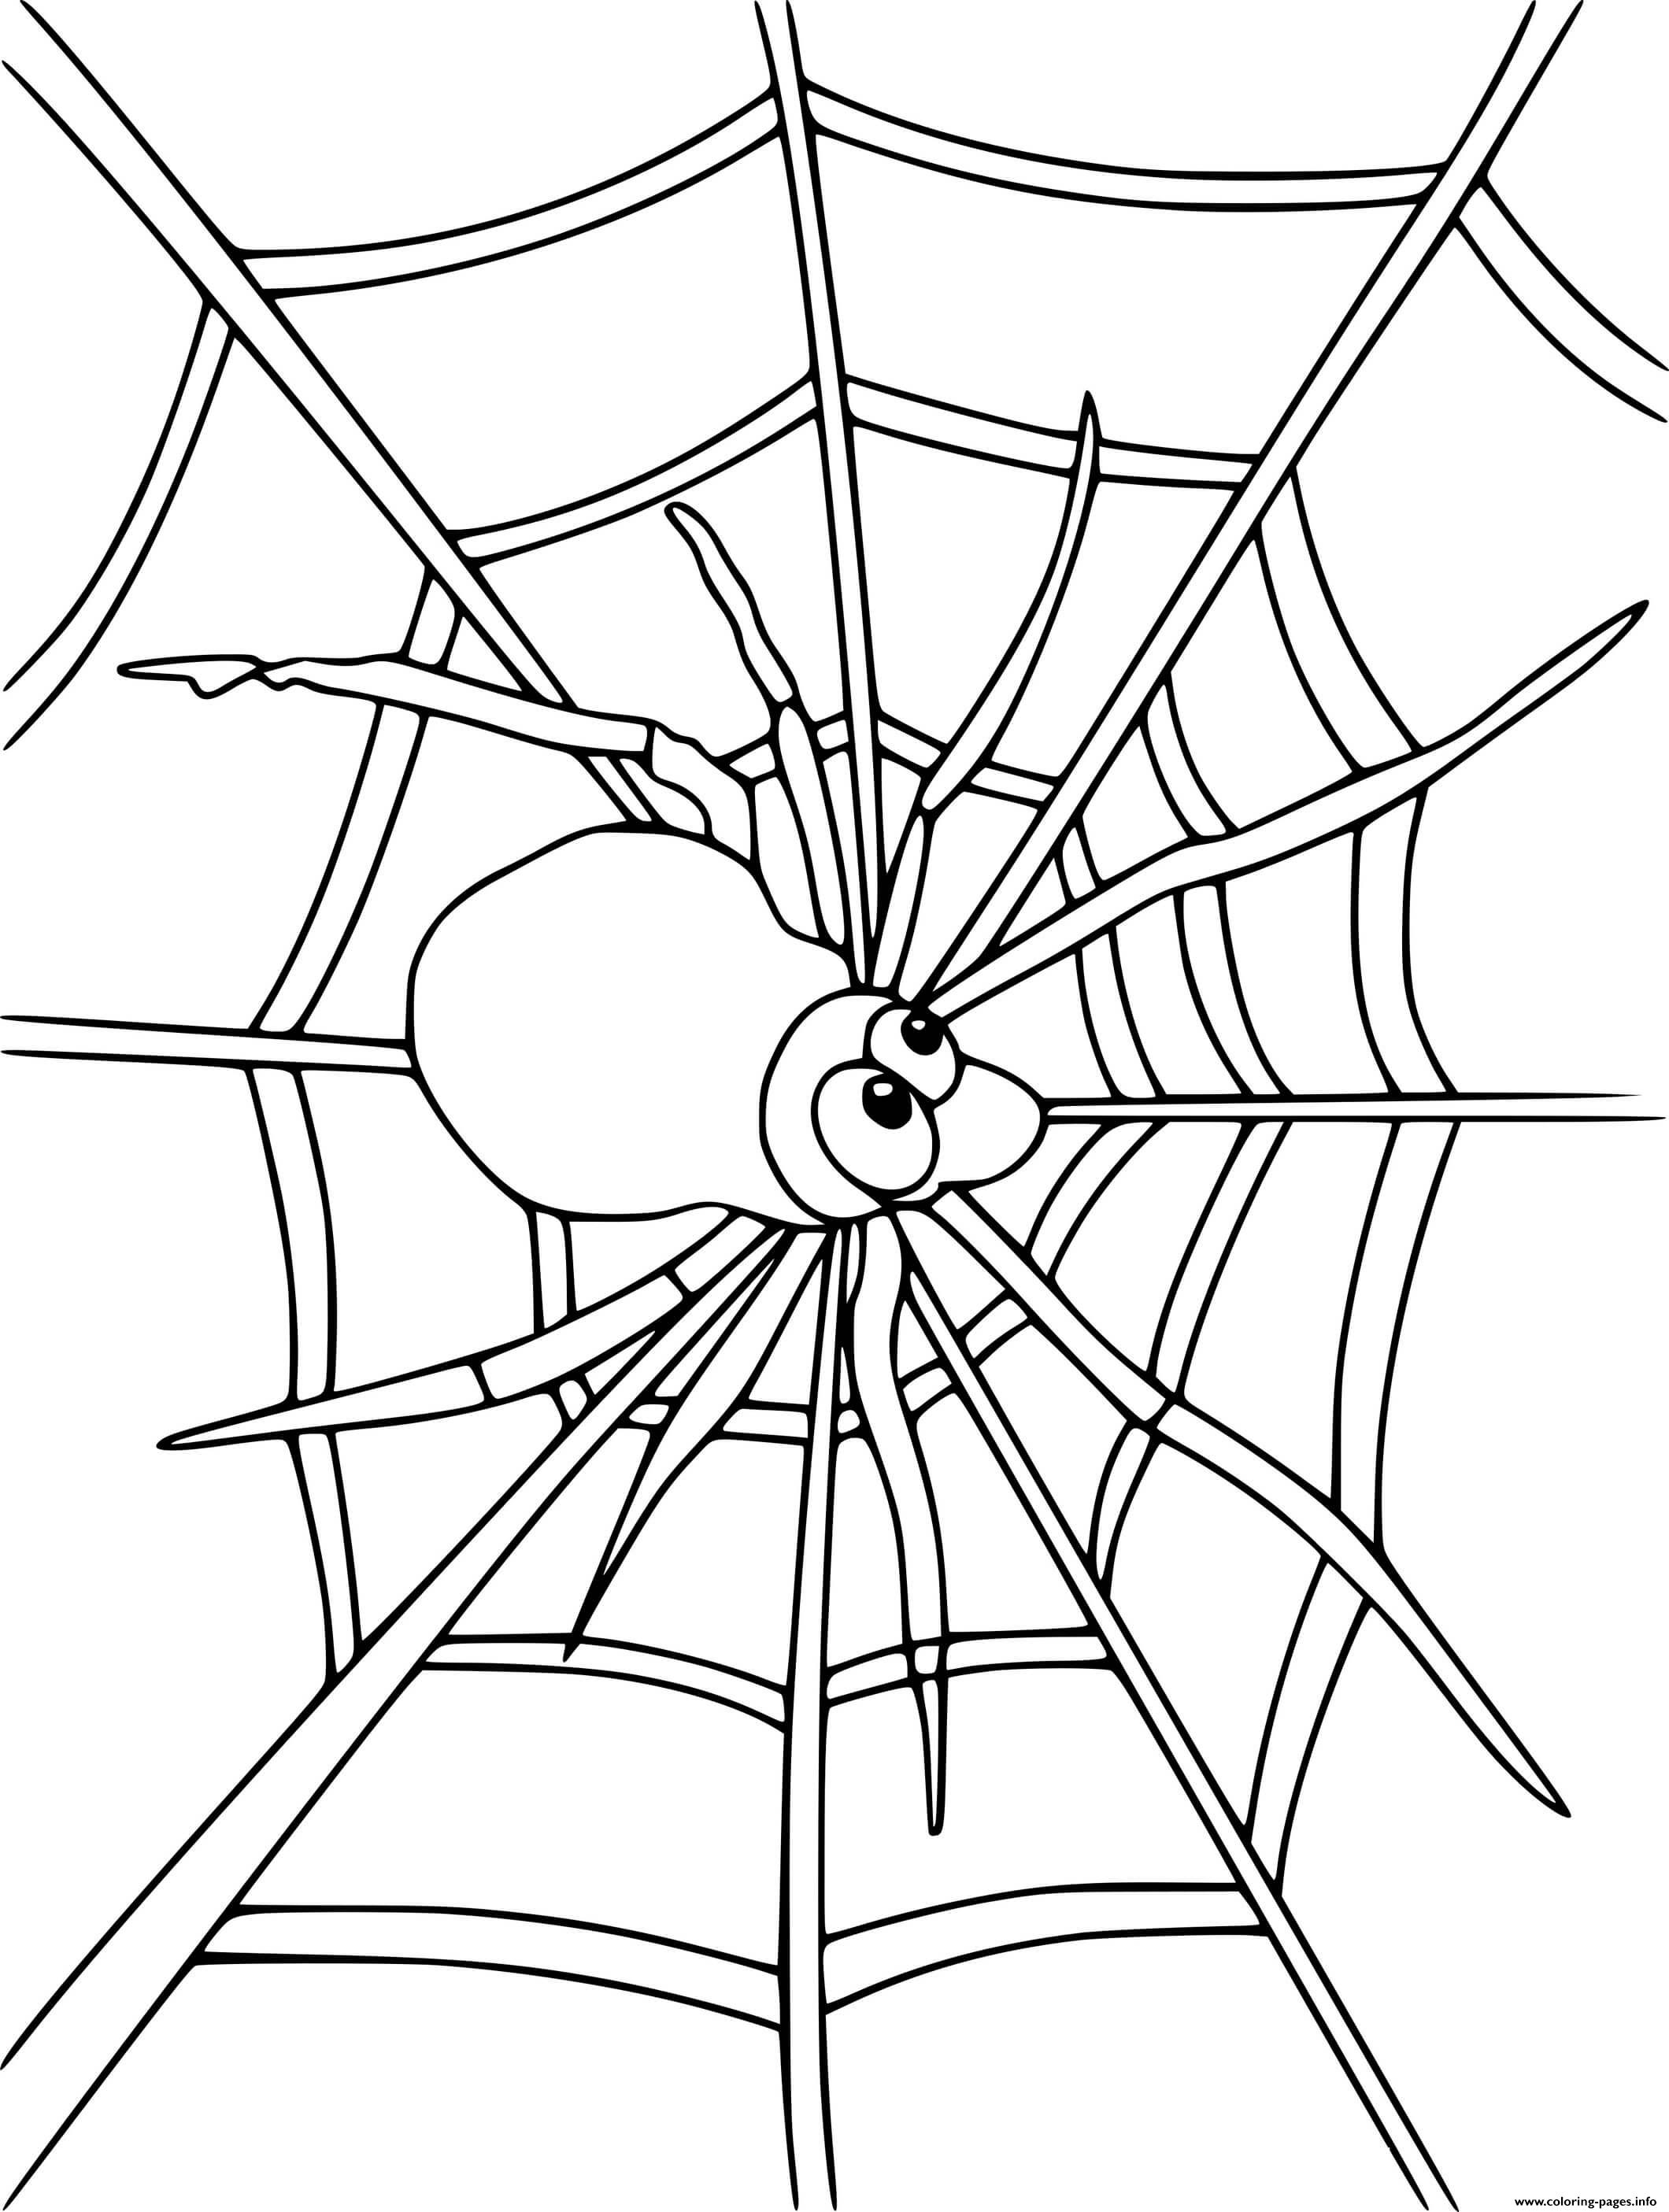 Cartoon Spider On The Web coloring